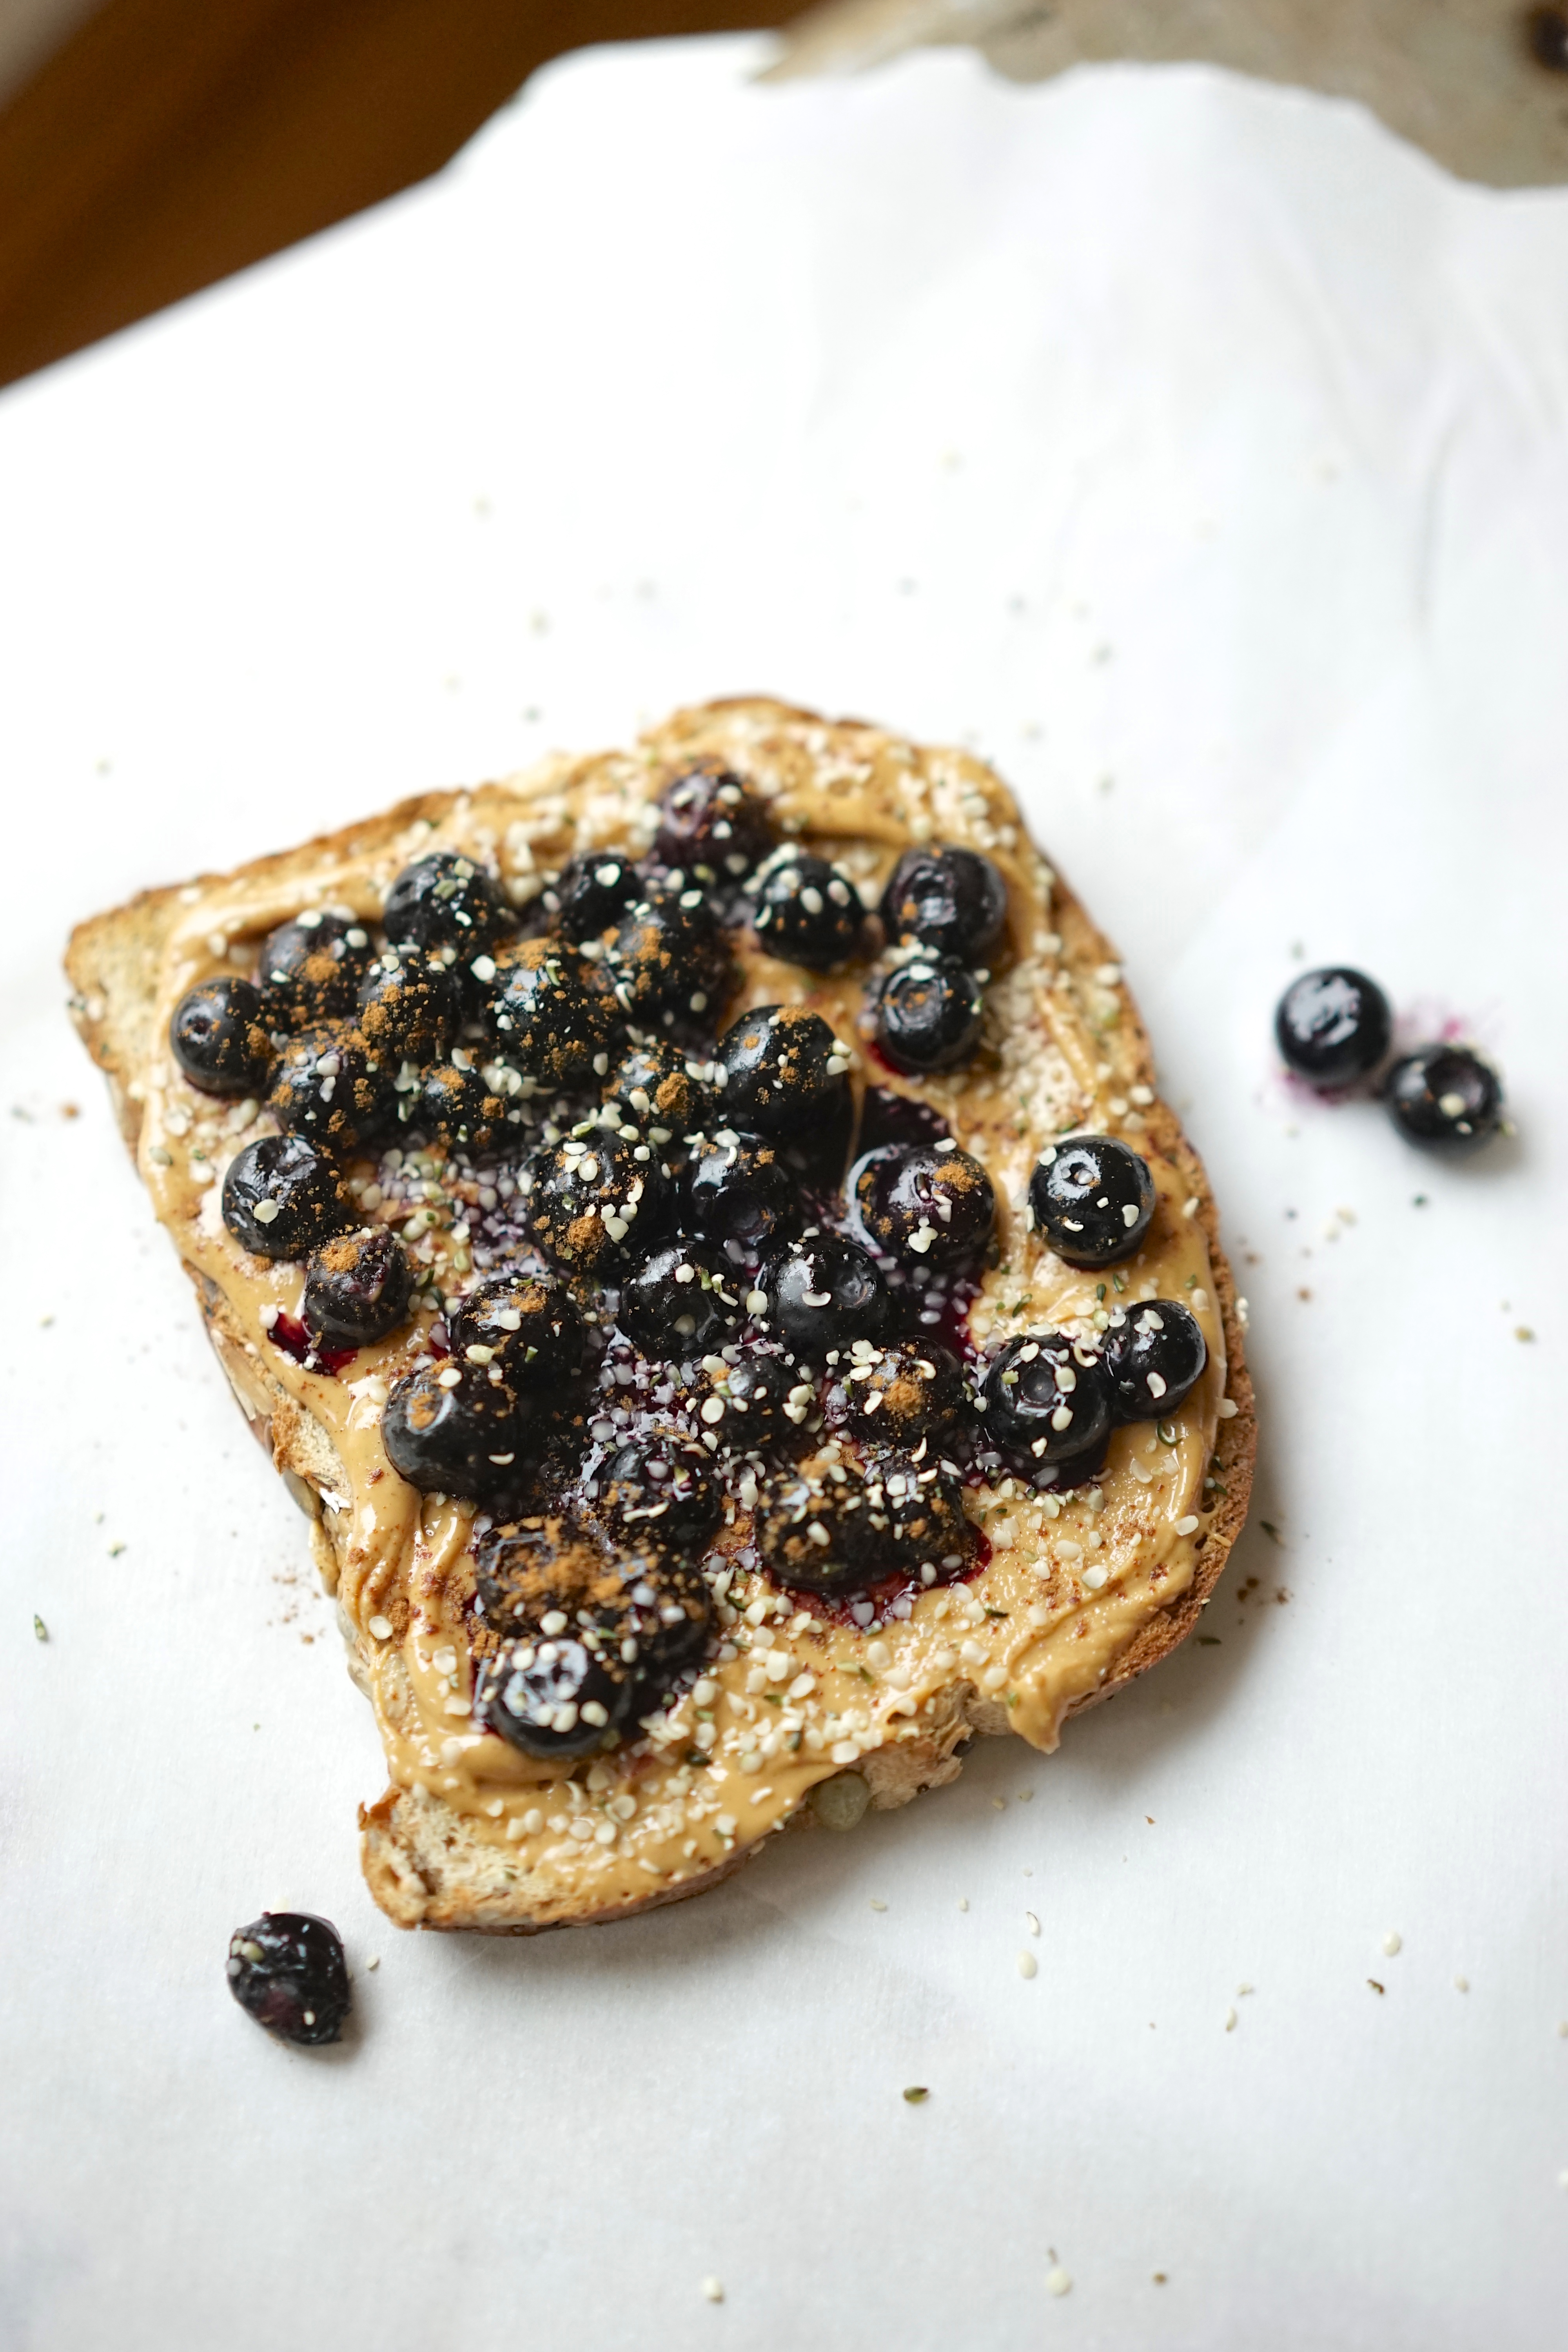 Peanut Butter & Cinnamon Blueberry Toast with Hemp Hearts | Living Healthy in Seattle